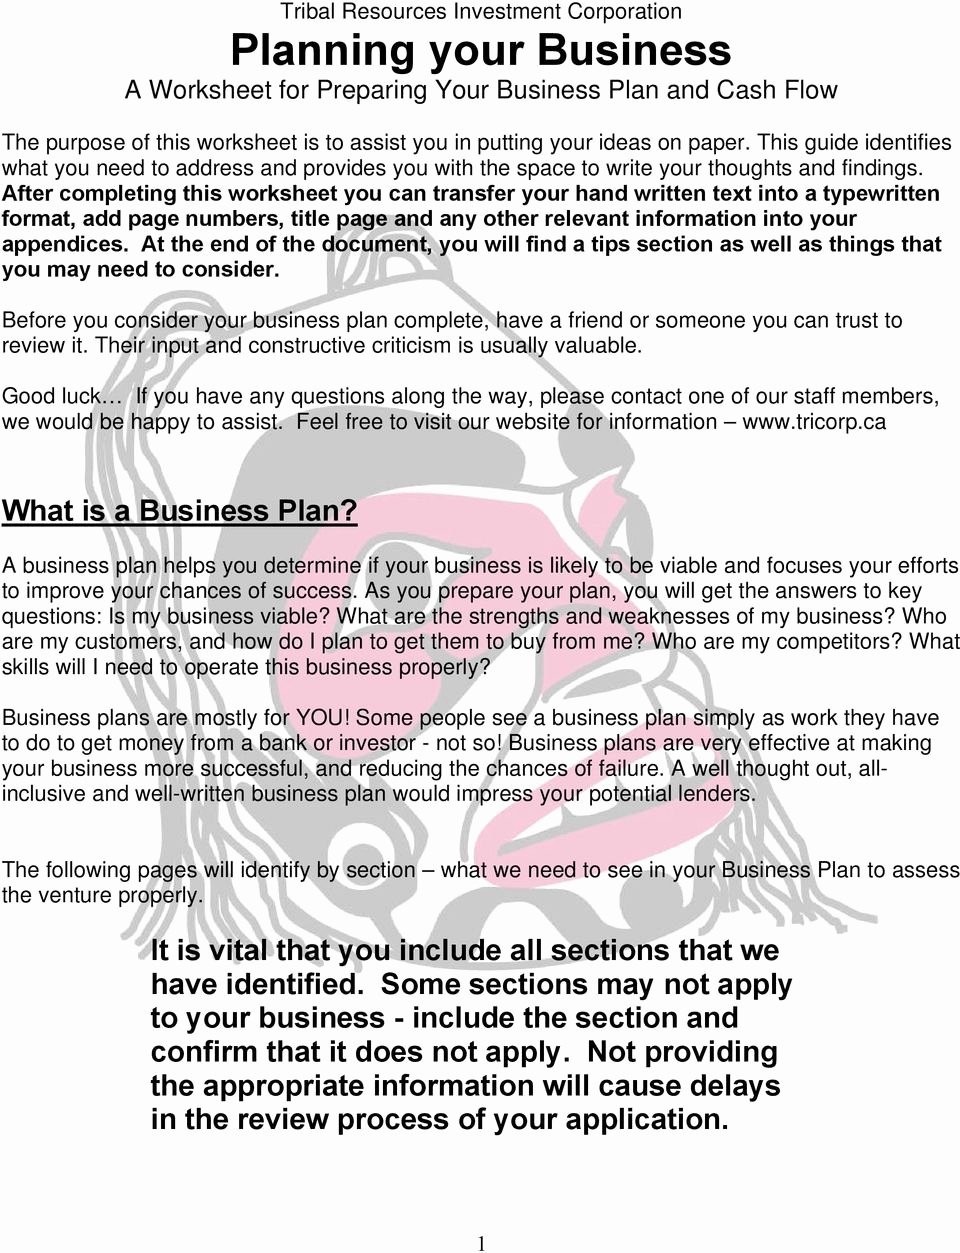 Respecting Others Property Essay Lovely Well Written Business Plan Well Written Business Plan